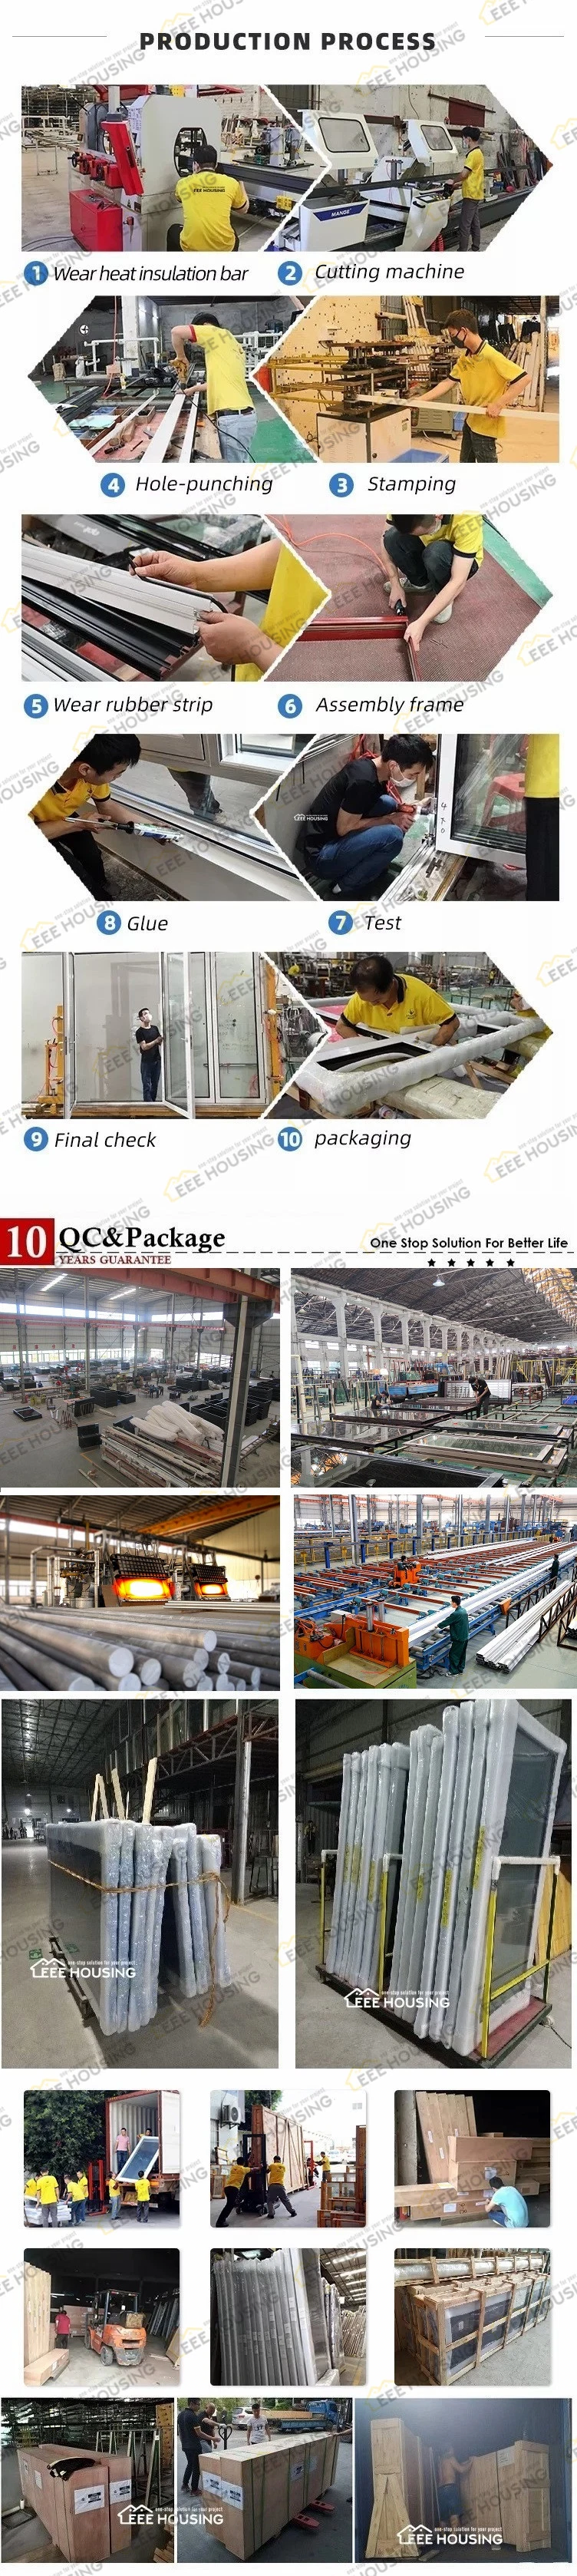 China Factory Supply Aluminum Glass Panel Modern Sectional Remote Control Glass Garage Roller Door Prices